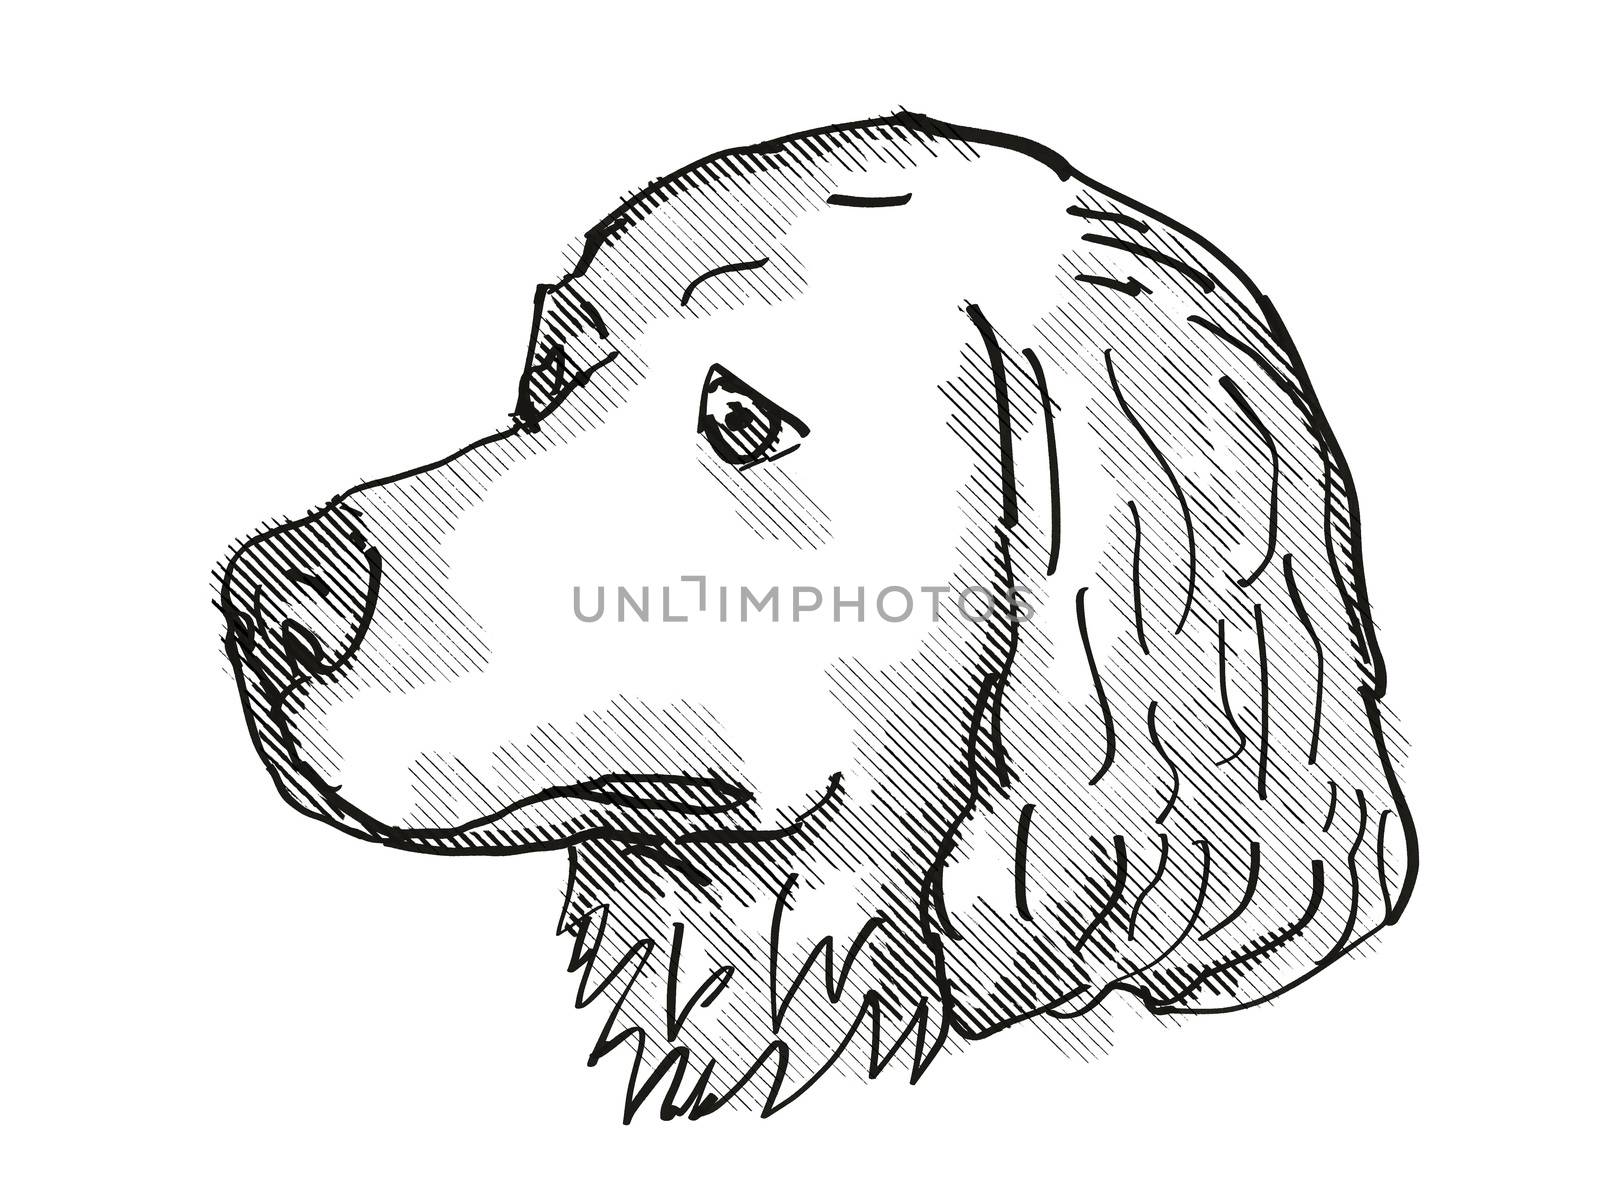 Retro cartoon style drawing of head of a Great Pyrenees, a domestic dog or canine breed on isolated white background done in black and white.